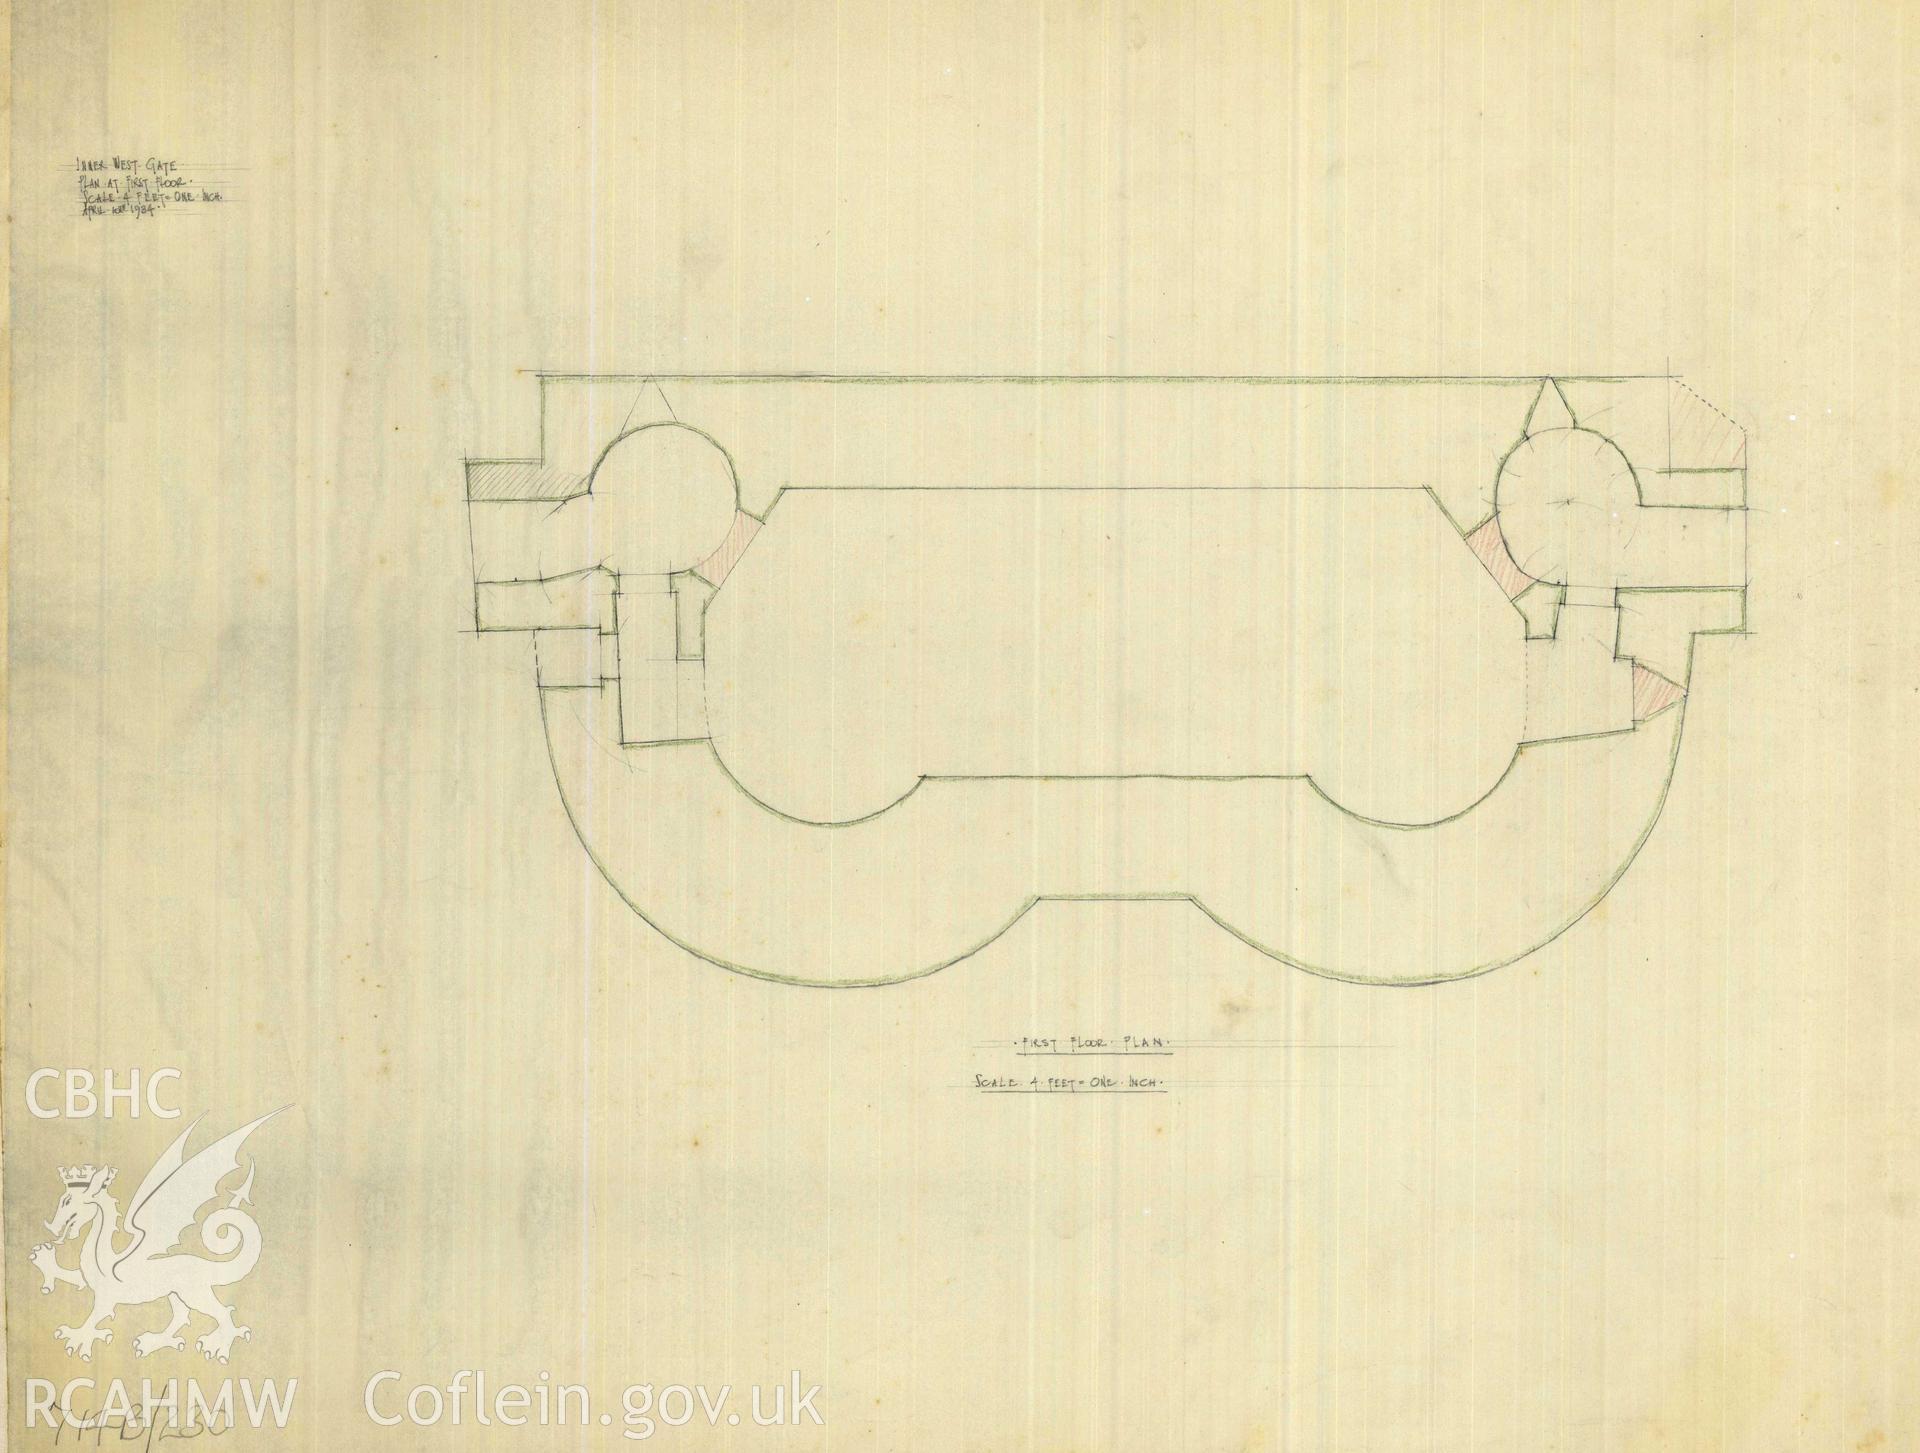 Cadw guardianship monument drawing of Caerphilly Castle. Inner W gate, upper floor plan. Cadw Ref. No:714B/230. Scale 1:48.